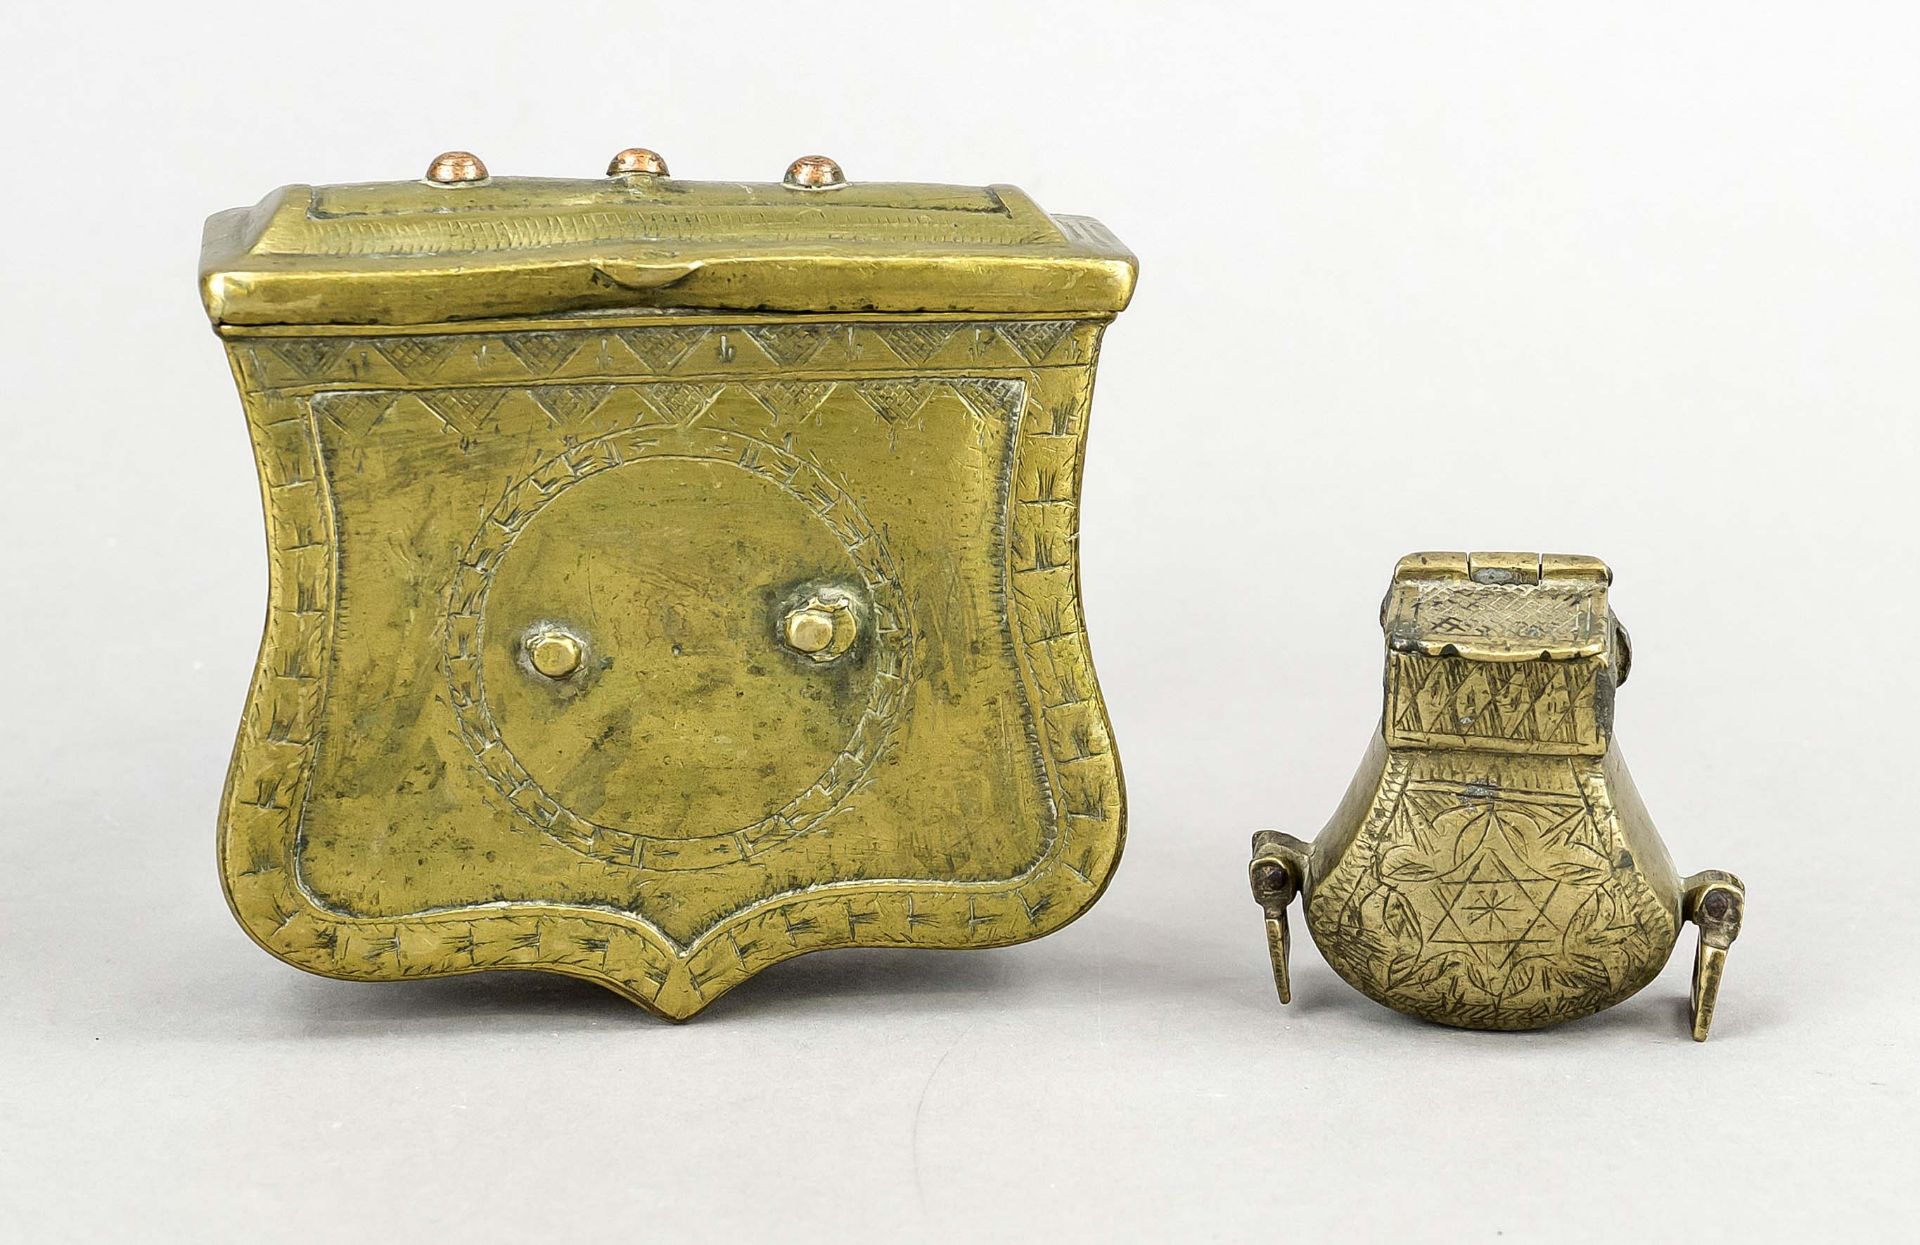 2 containers for gunpowder or cartridges, probably 19th century Ottoman, brass. One box with belt